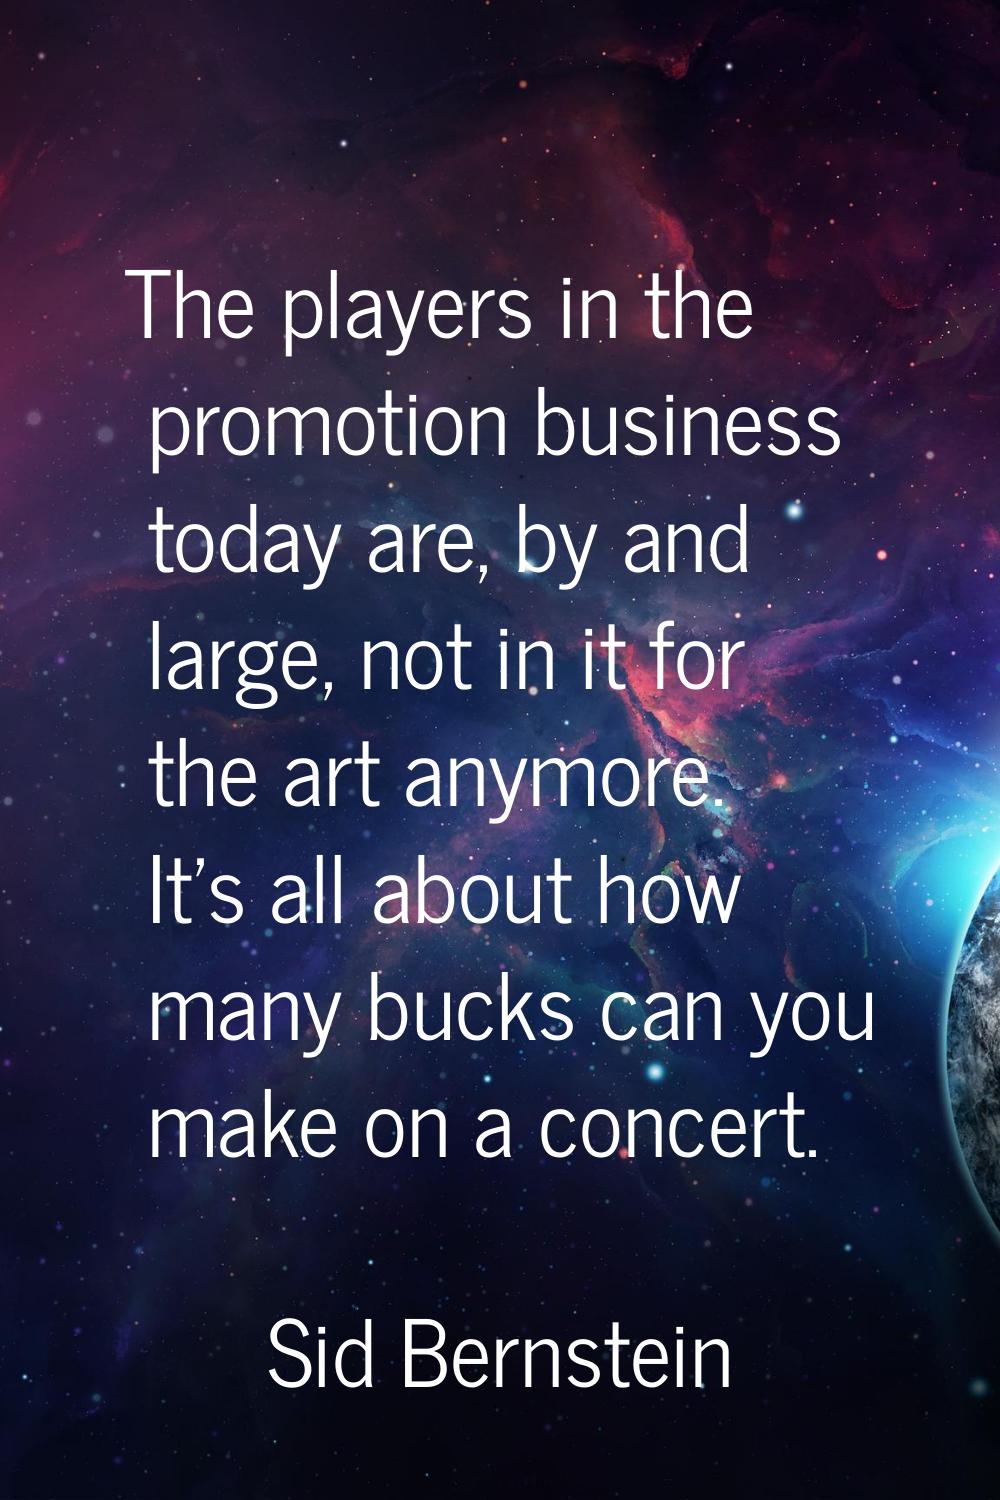 The players in the promotion business today are, by and large, not in it for the art anymore. It's 